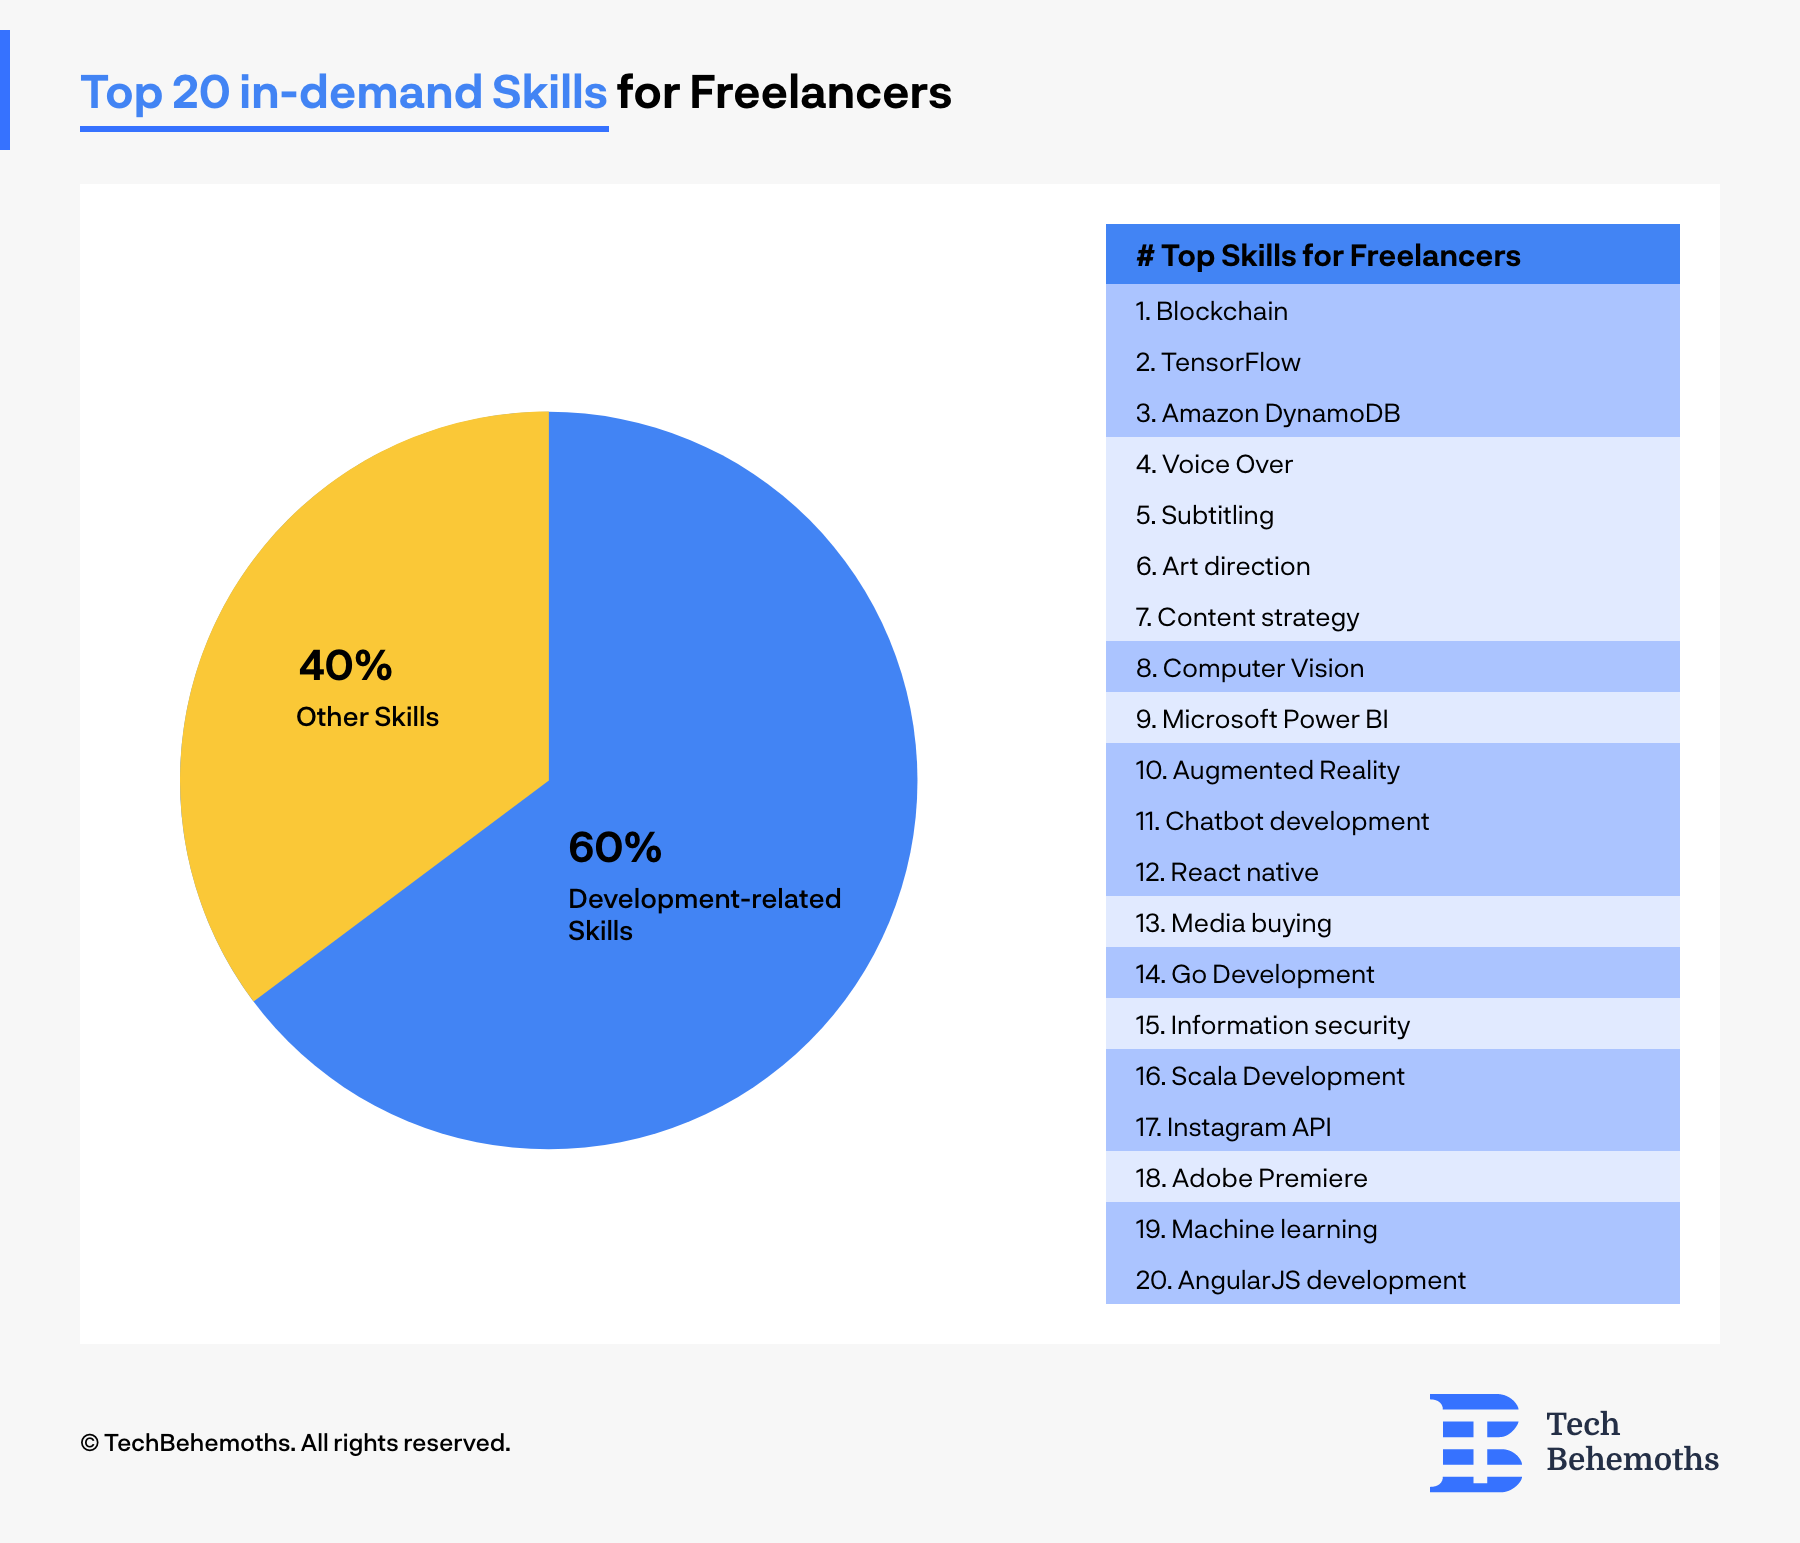 Top 20 in-demand Skills for Freelancers